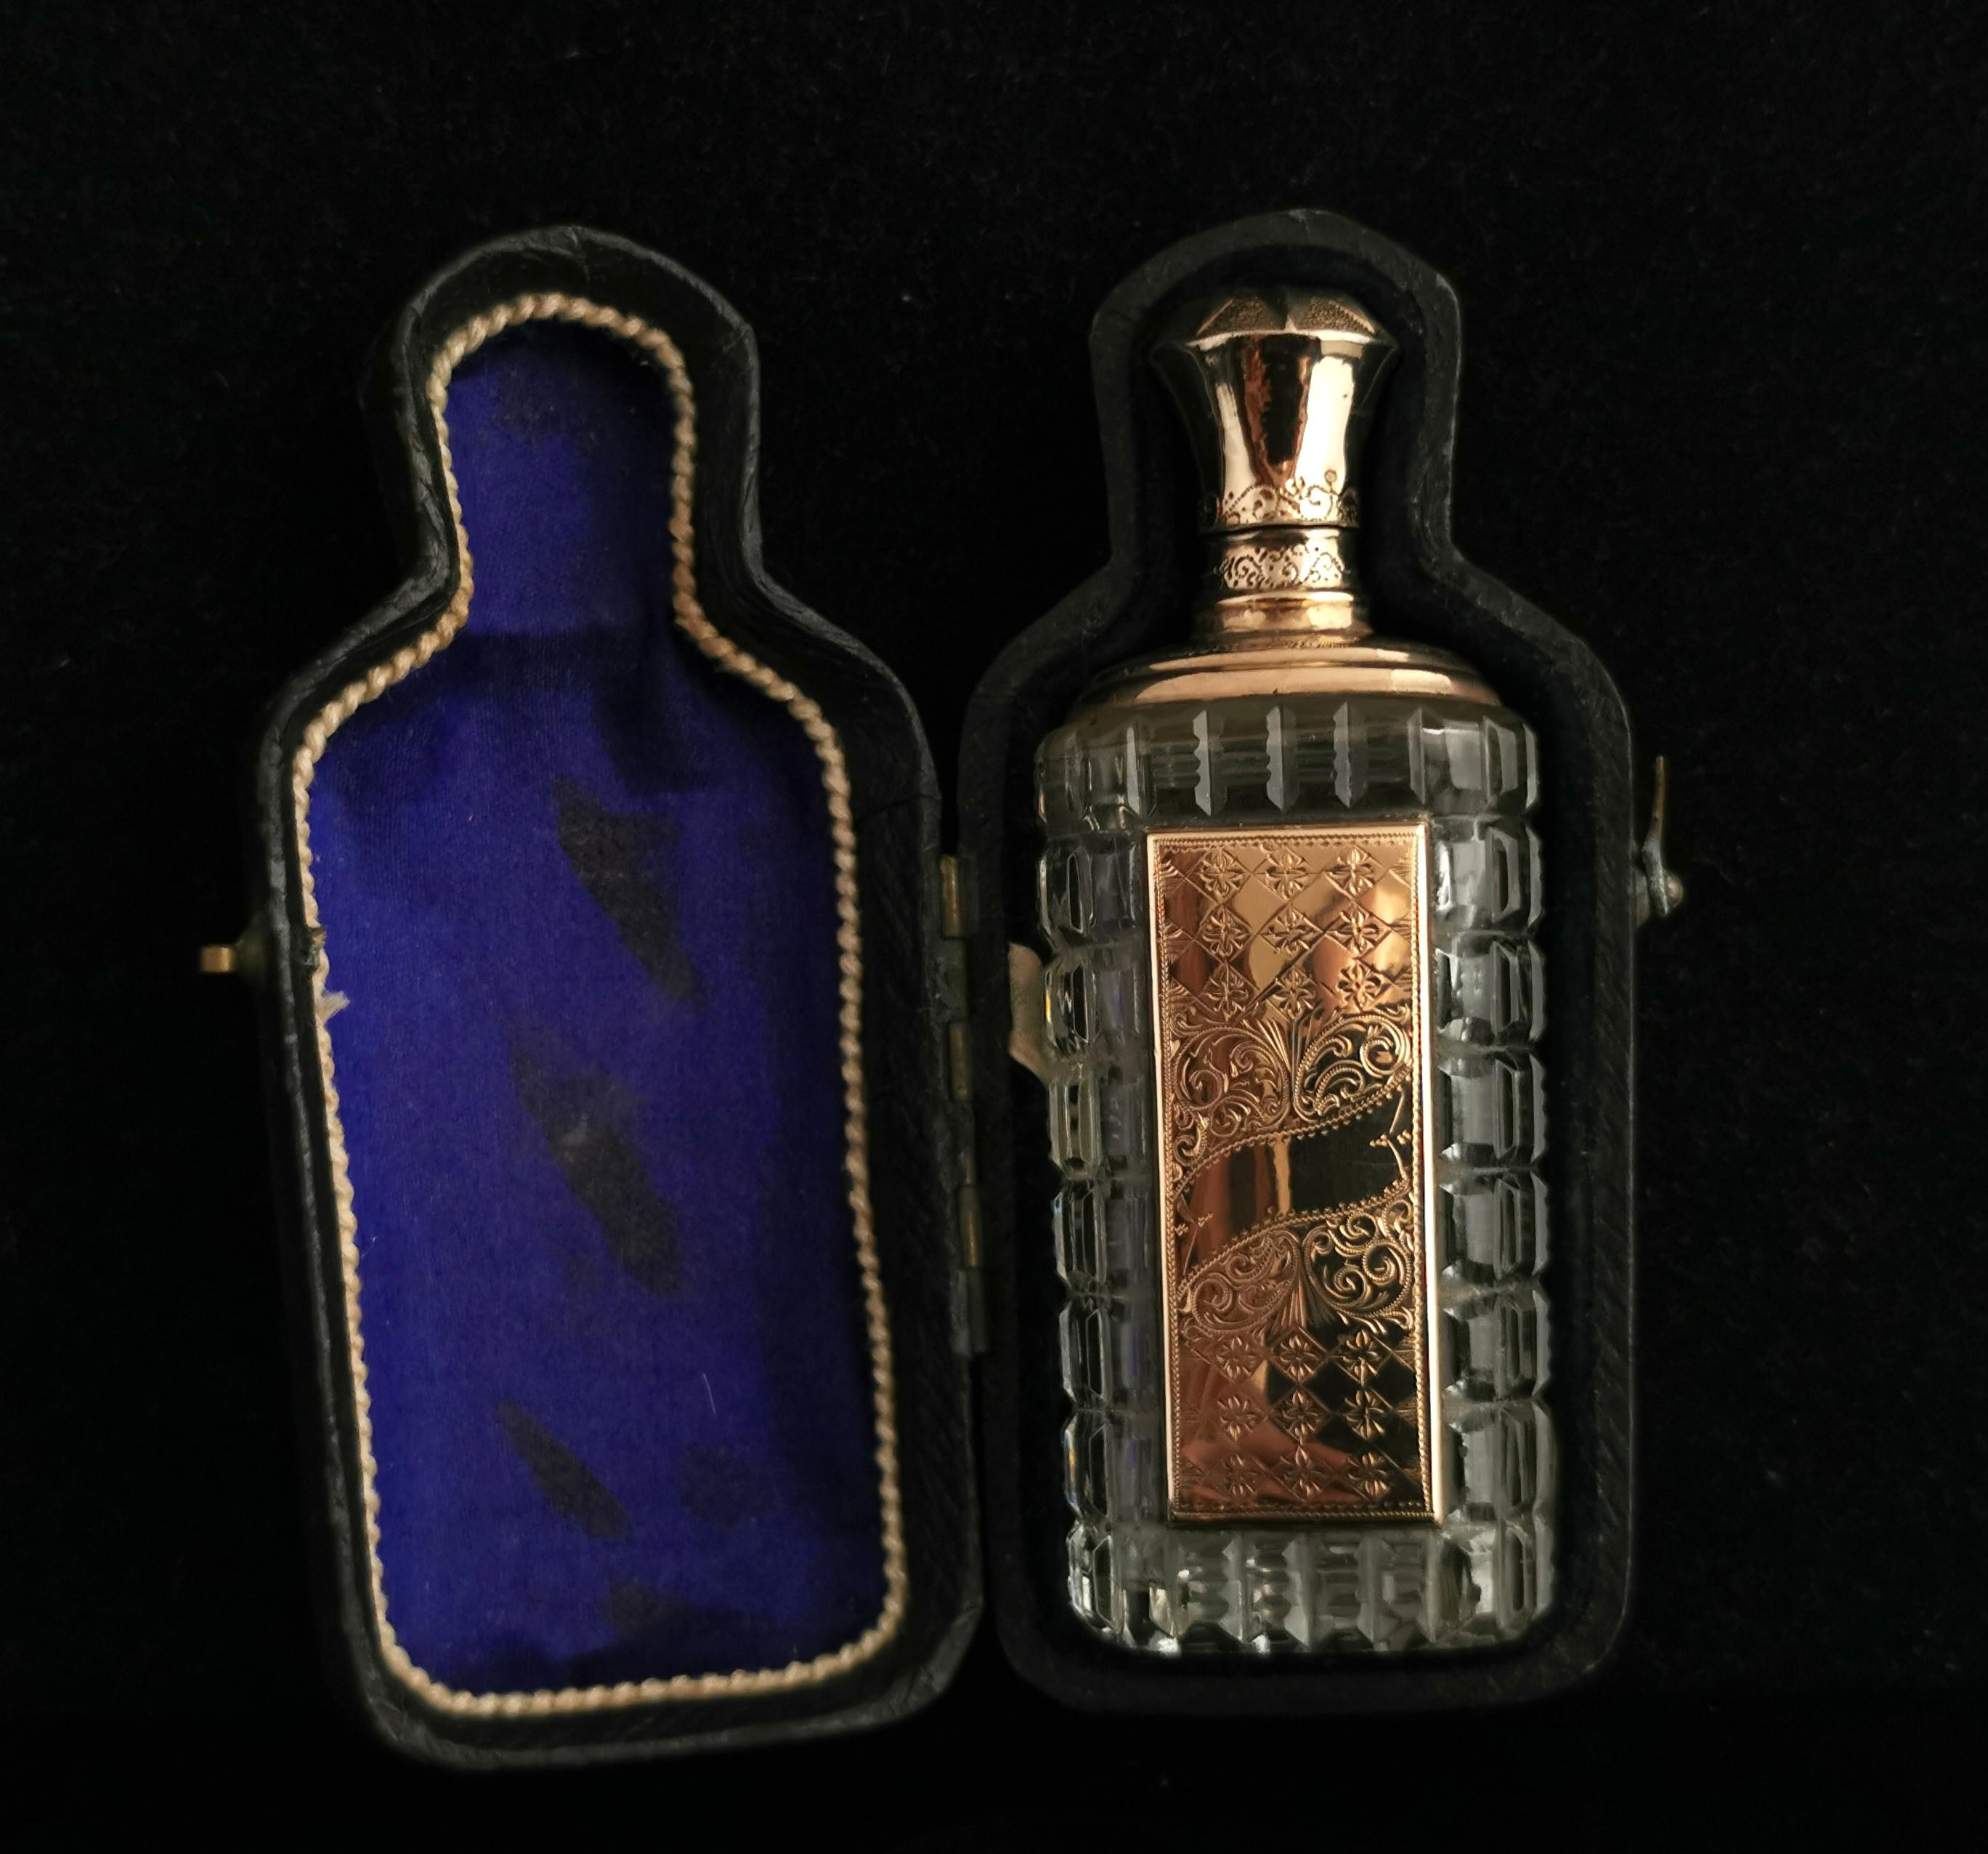 A stunning antique late 19th century 14 karat gold and cut glass scent bottle.

This is an absolute stunner with the chunky faceted cut reflecting the light beautifully from the facets, the front has an applied Rose gold panel with an engraved